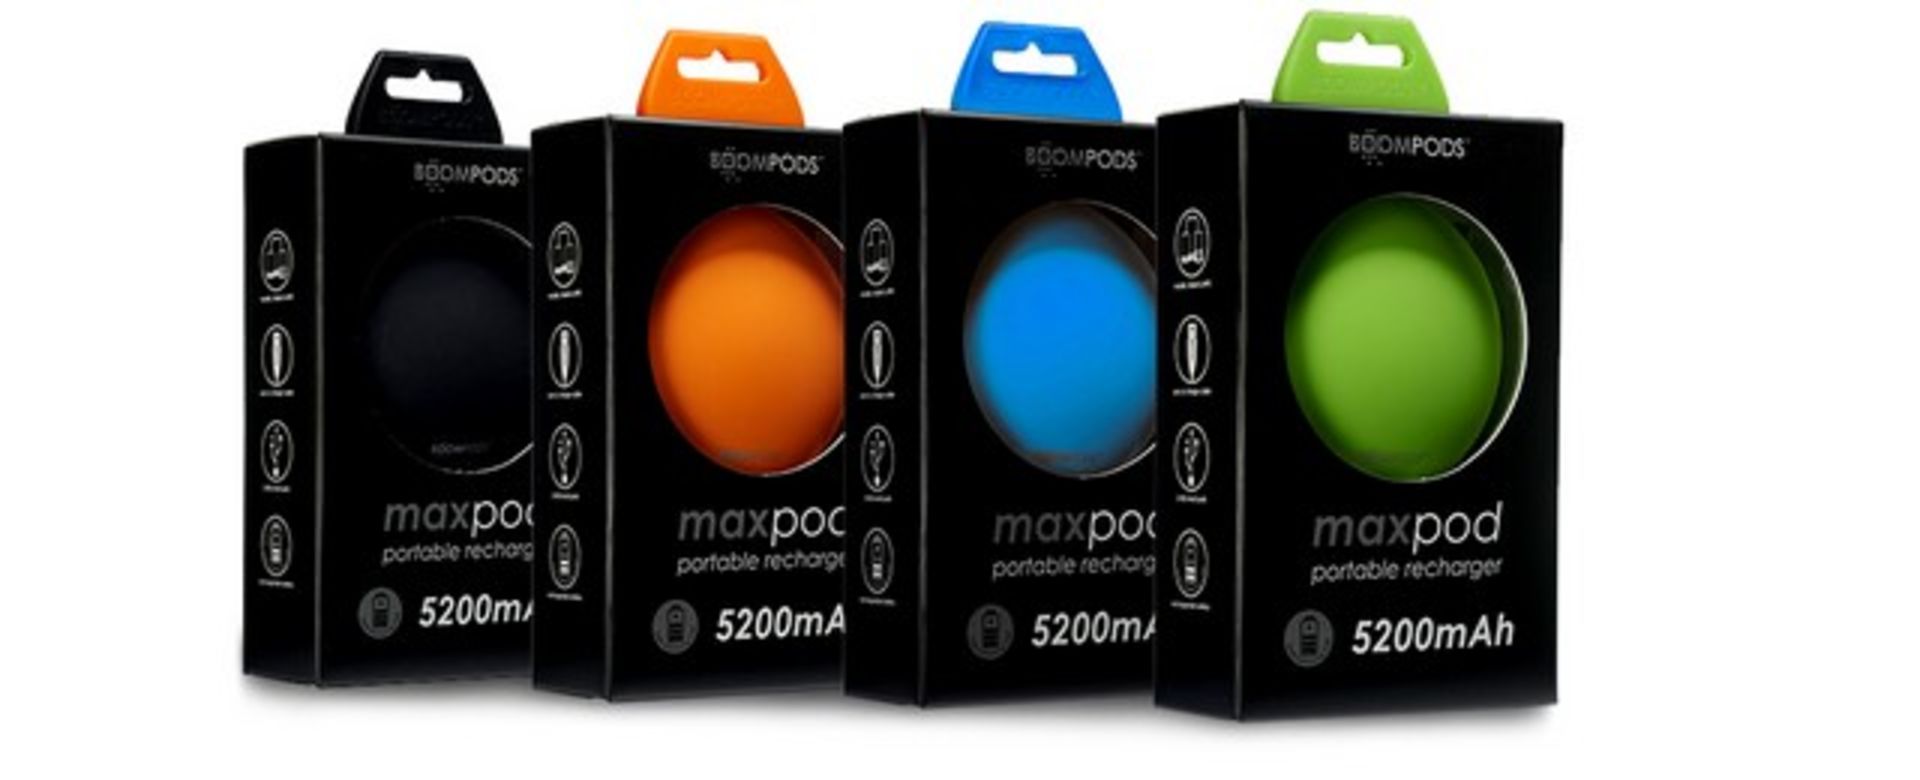 V Brand New MaxPod by Boom Pods 5200mAh Portable Charger with 2 x Smart USB Ports - For Mobiles